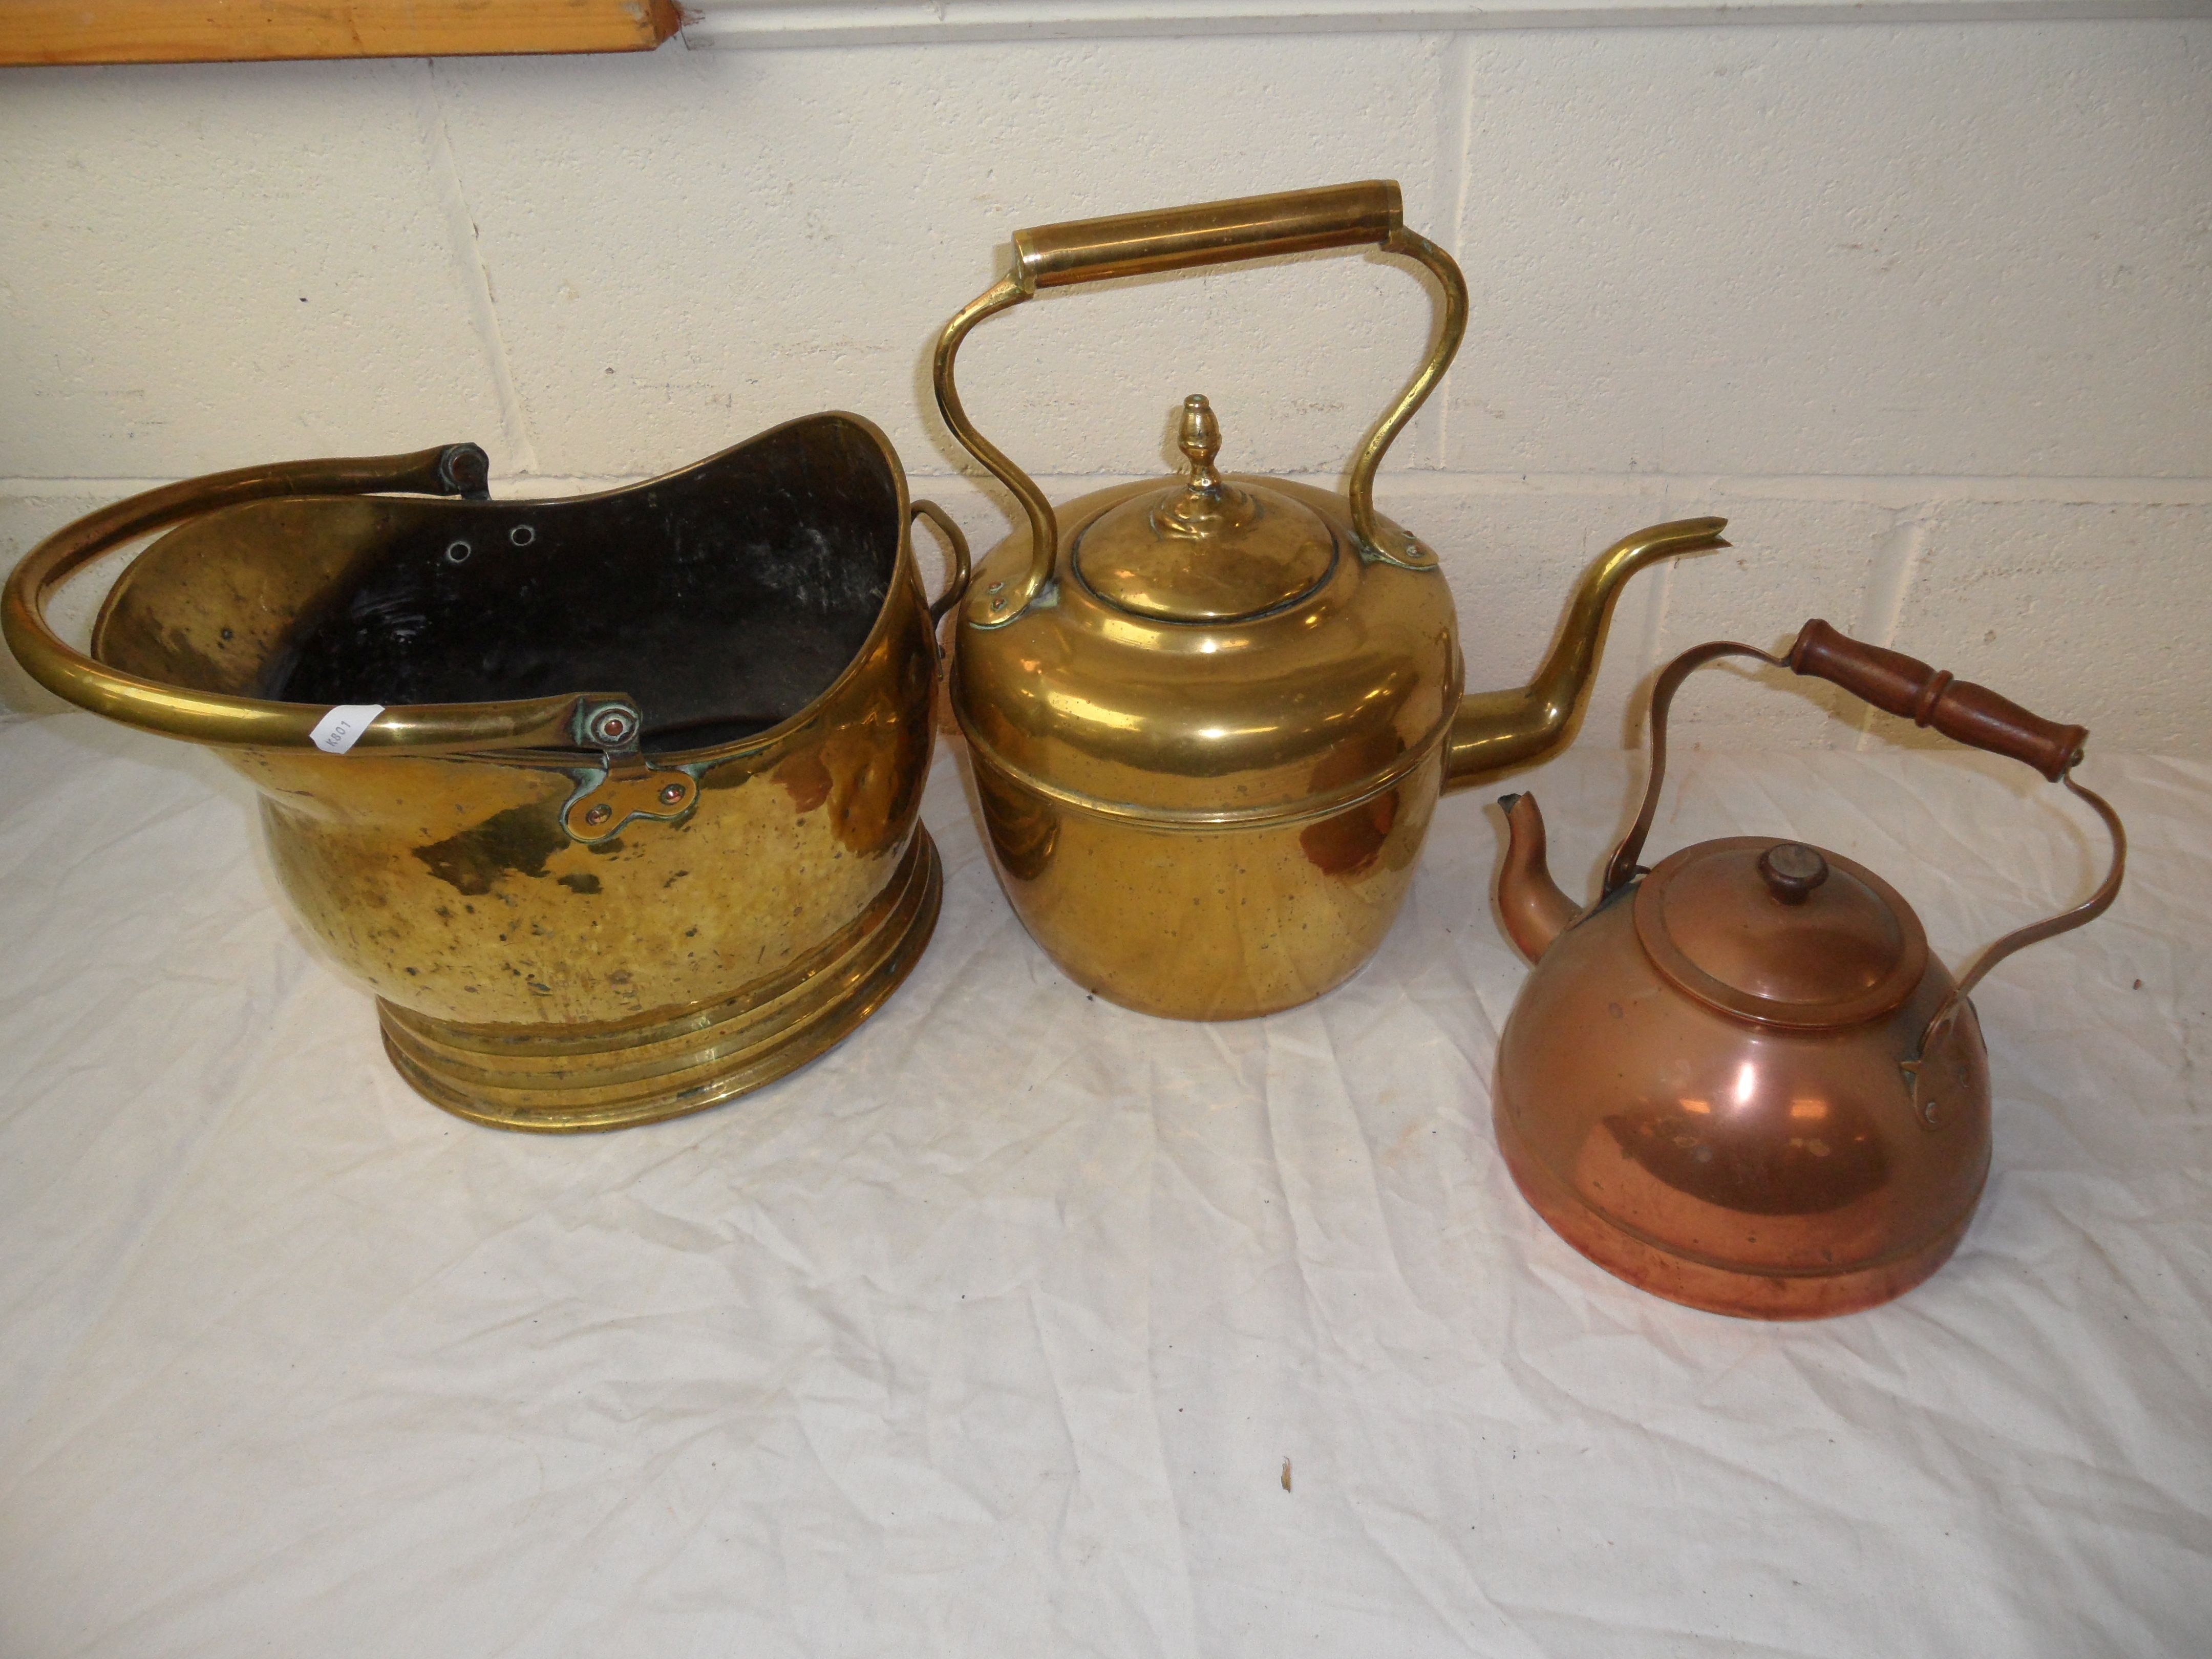 Antique Brass Kettle together with a Brass Coal Bucket and a Copper Kettle